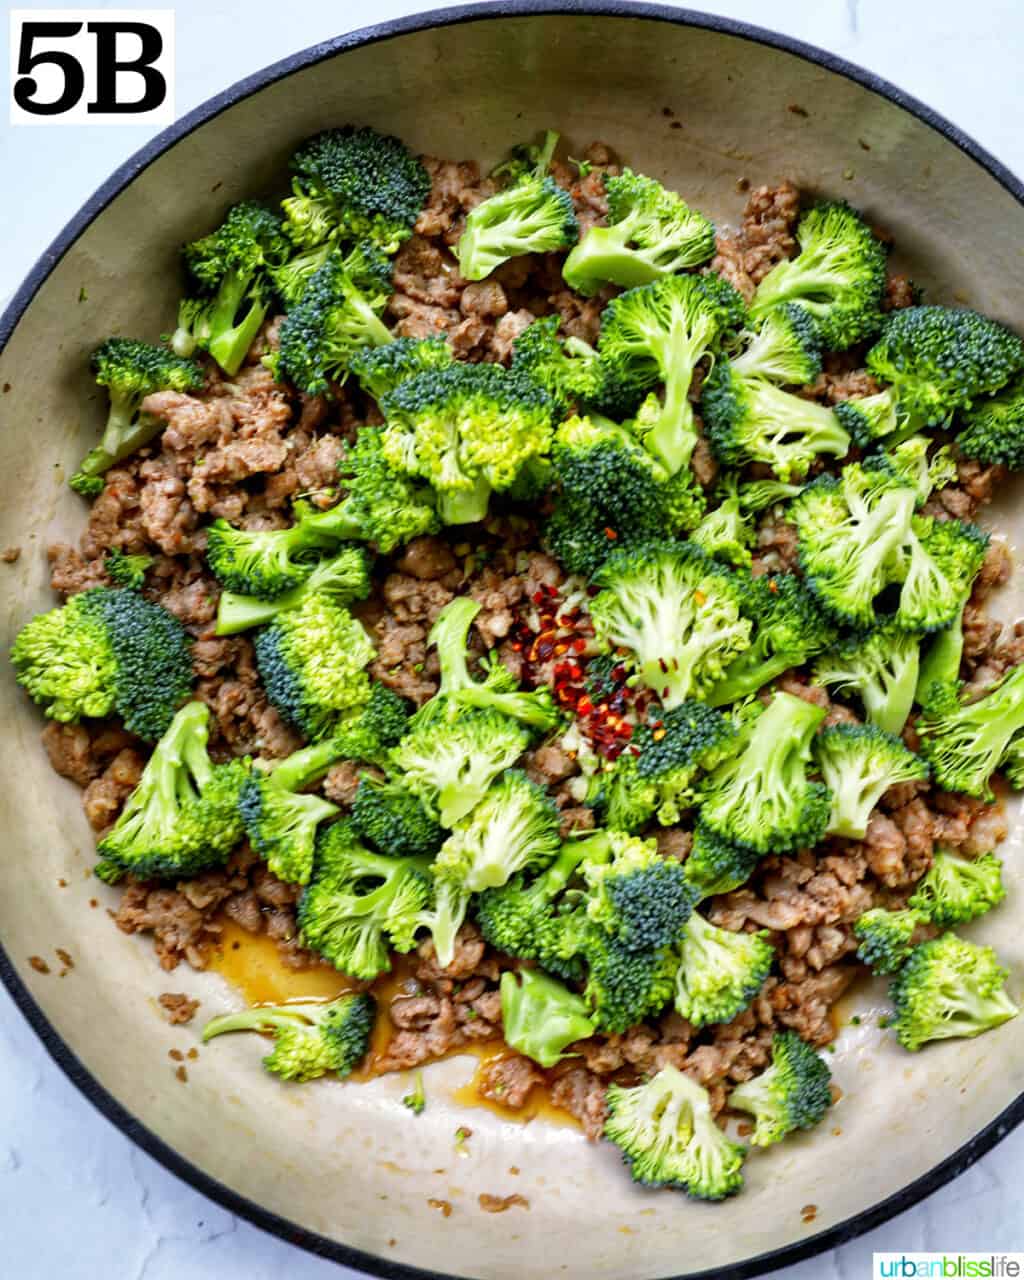 red pepper flakes added to broccoli and Italian sausage cooking in a large skillet.